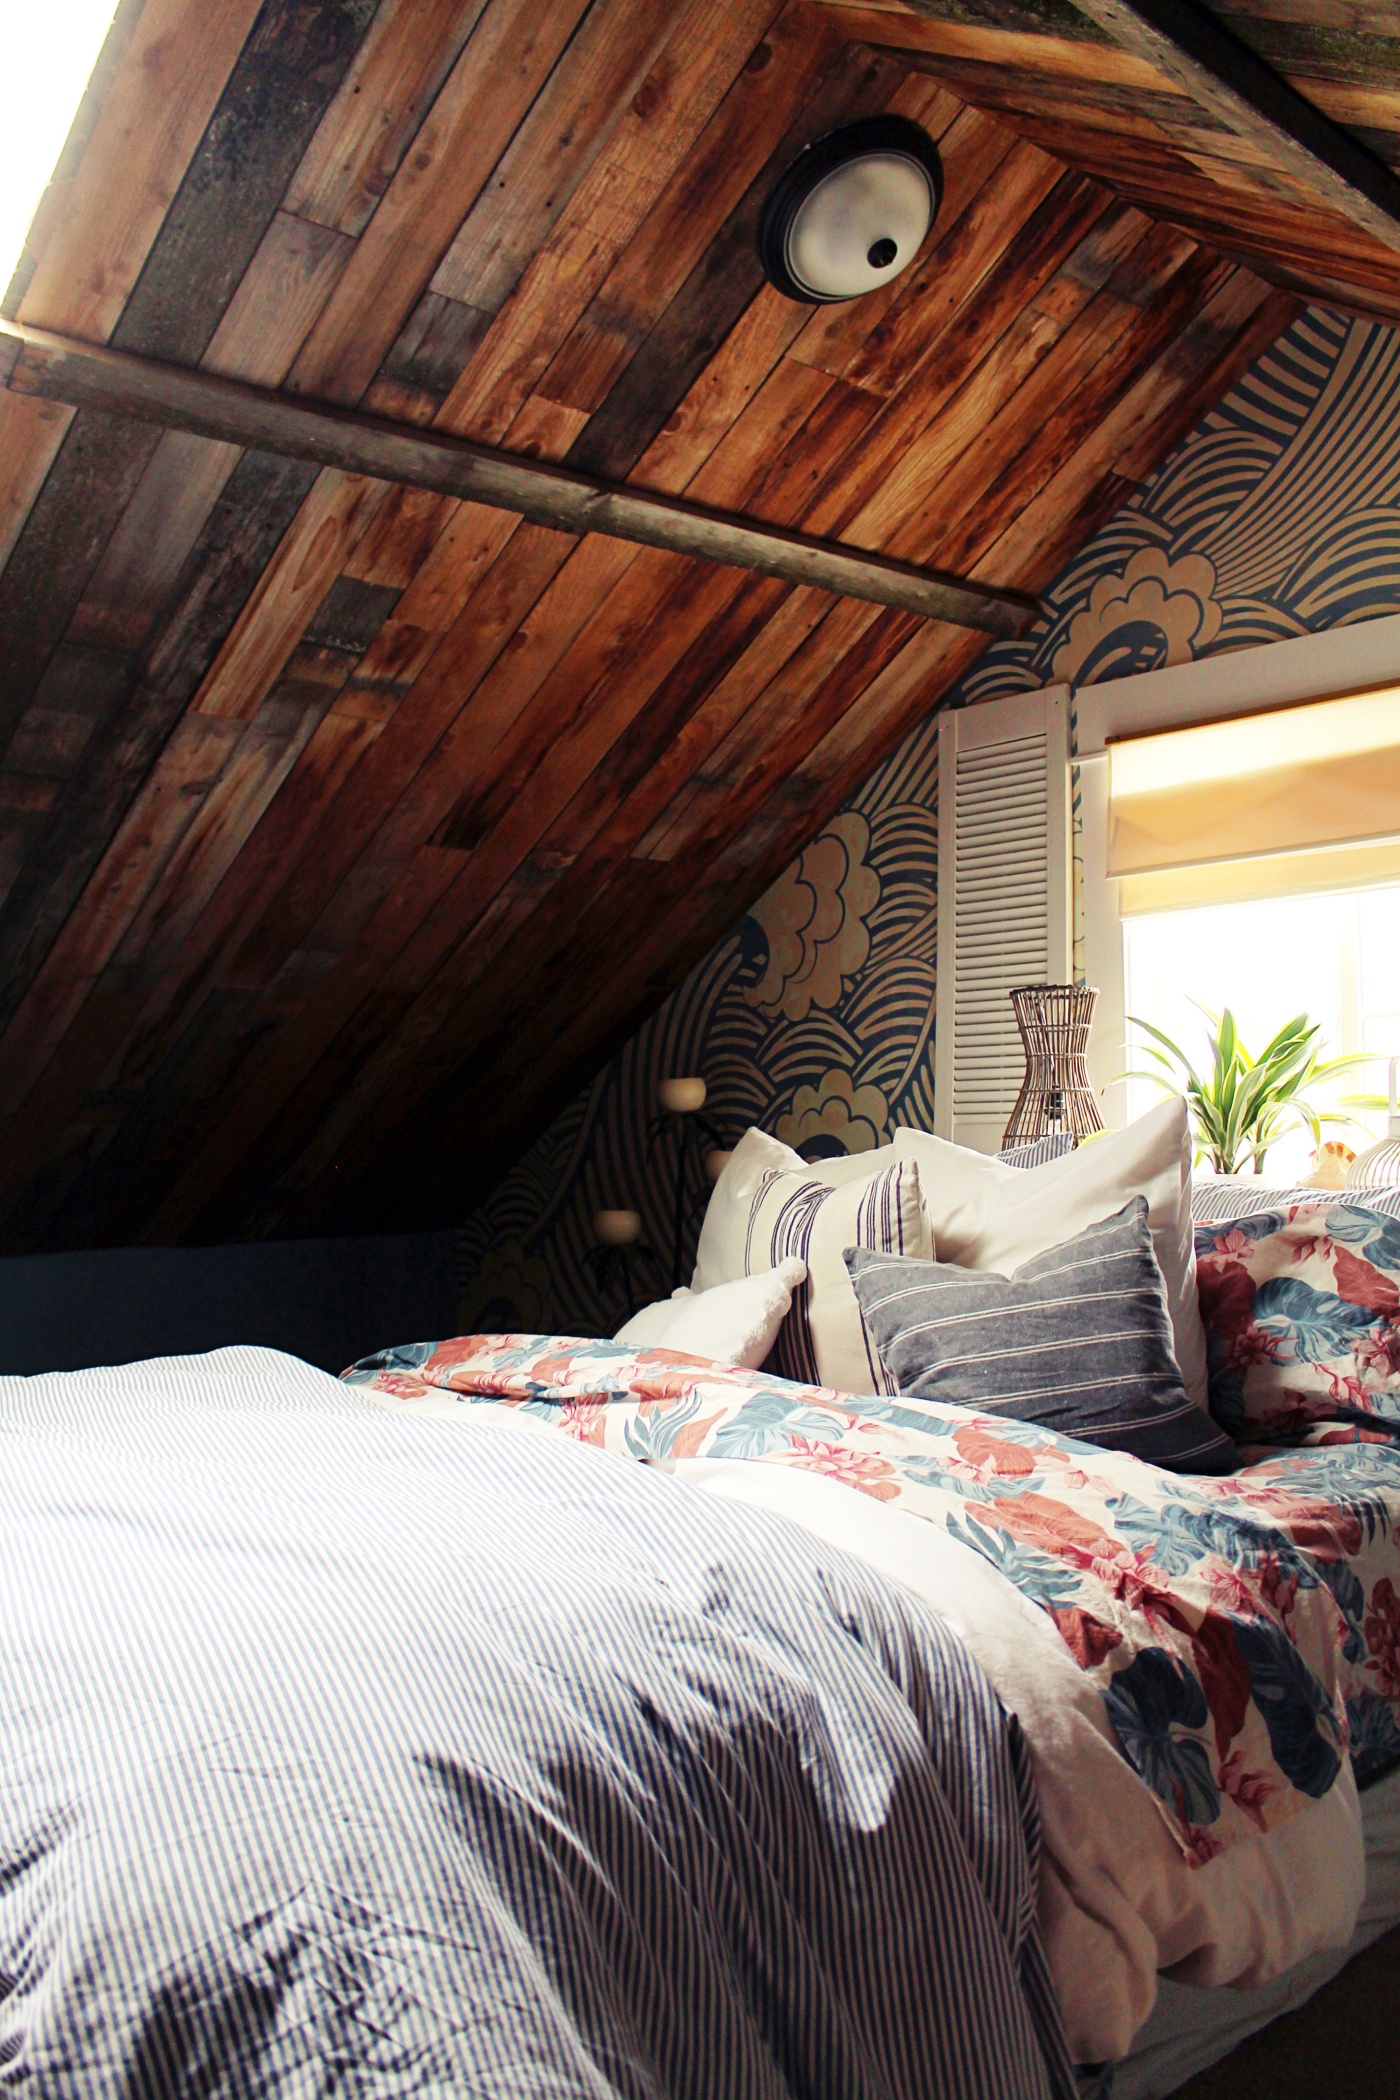 We Added Barn Wood to Our Bedroom Ceiling